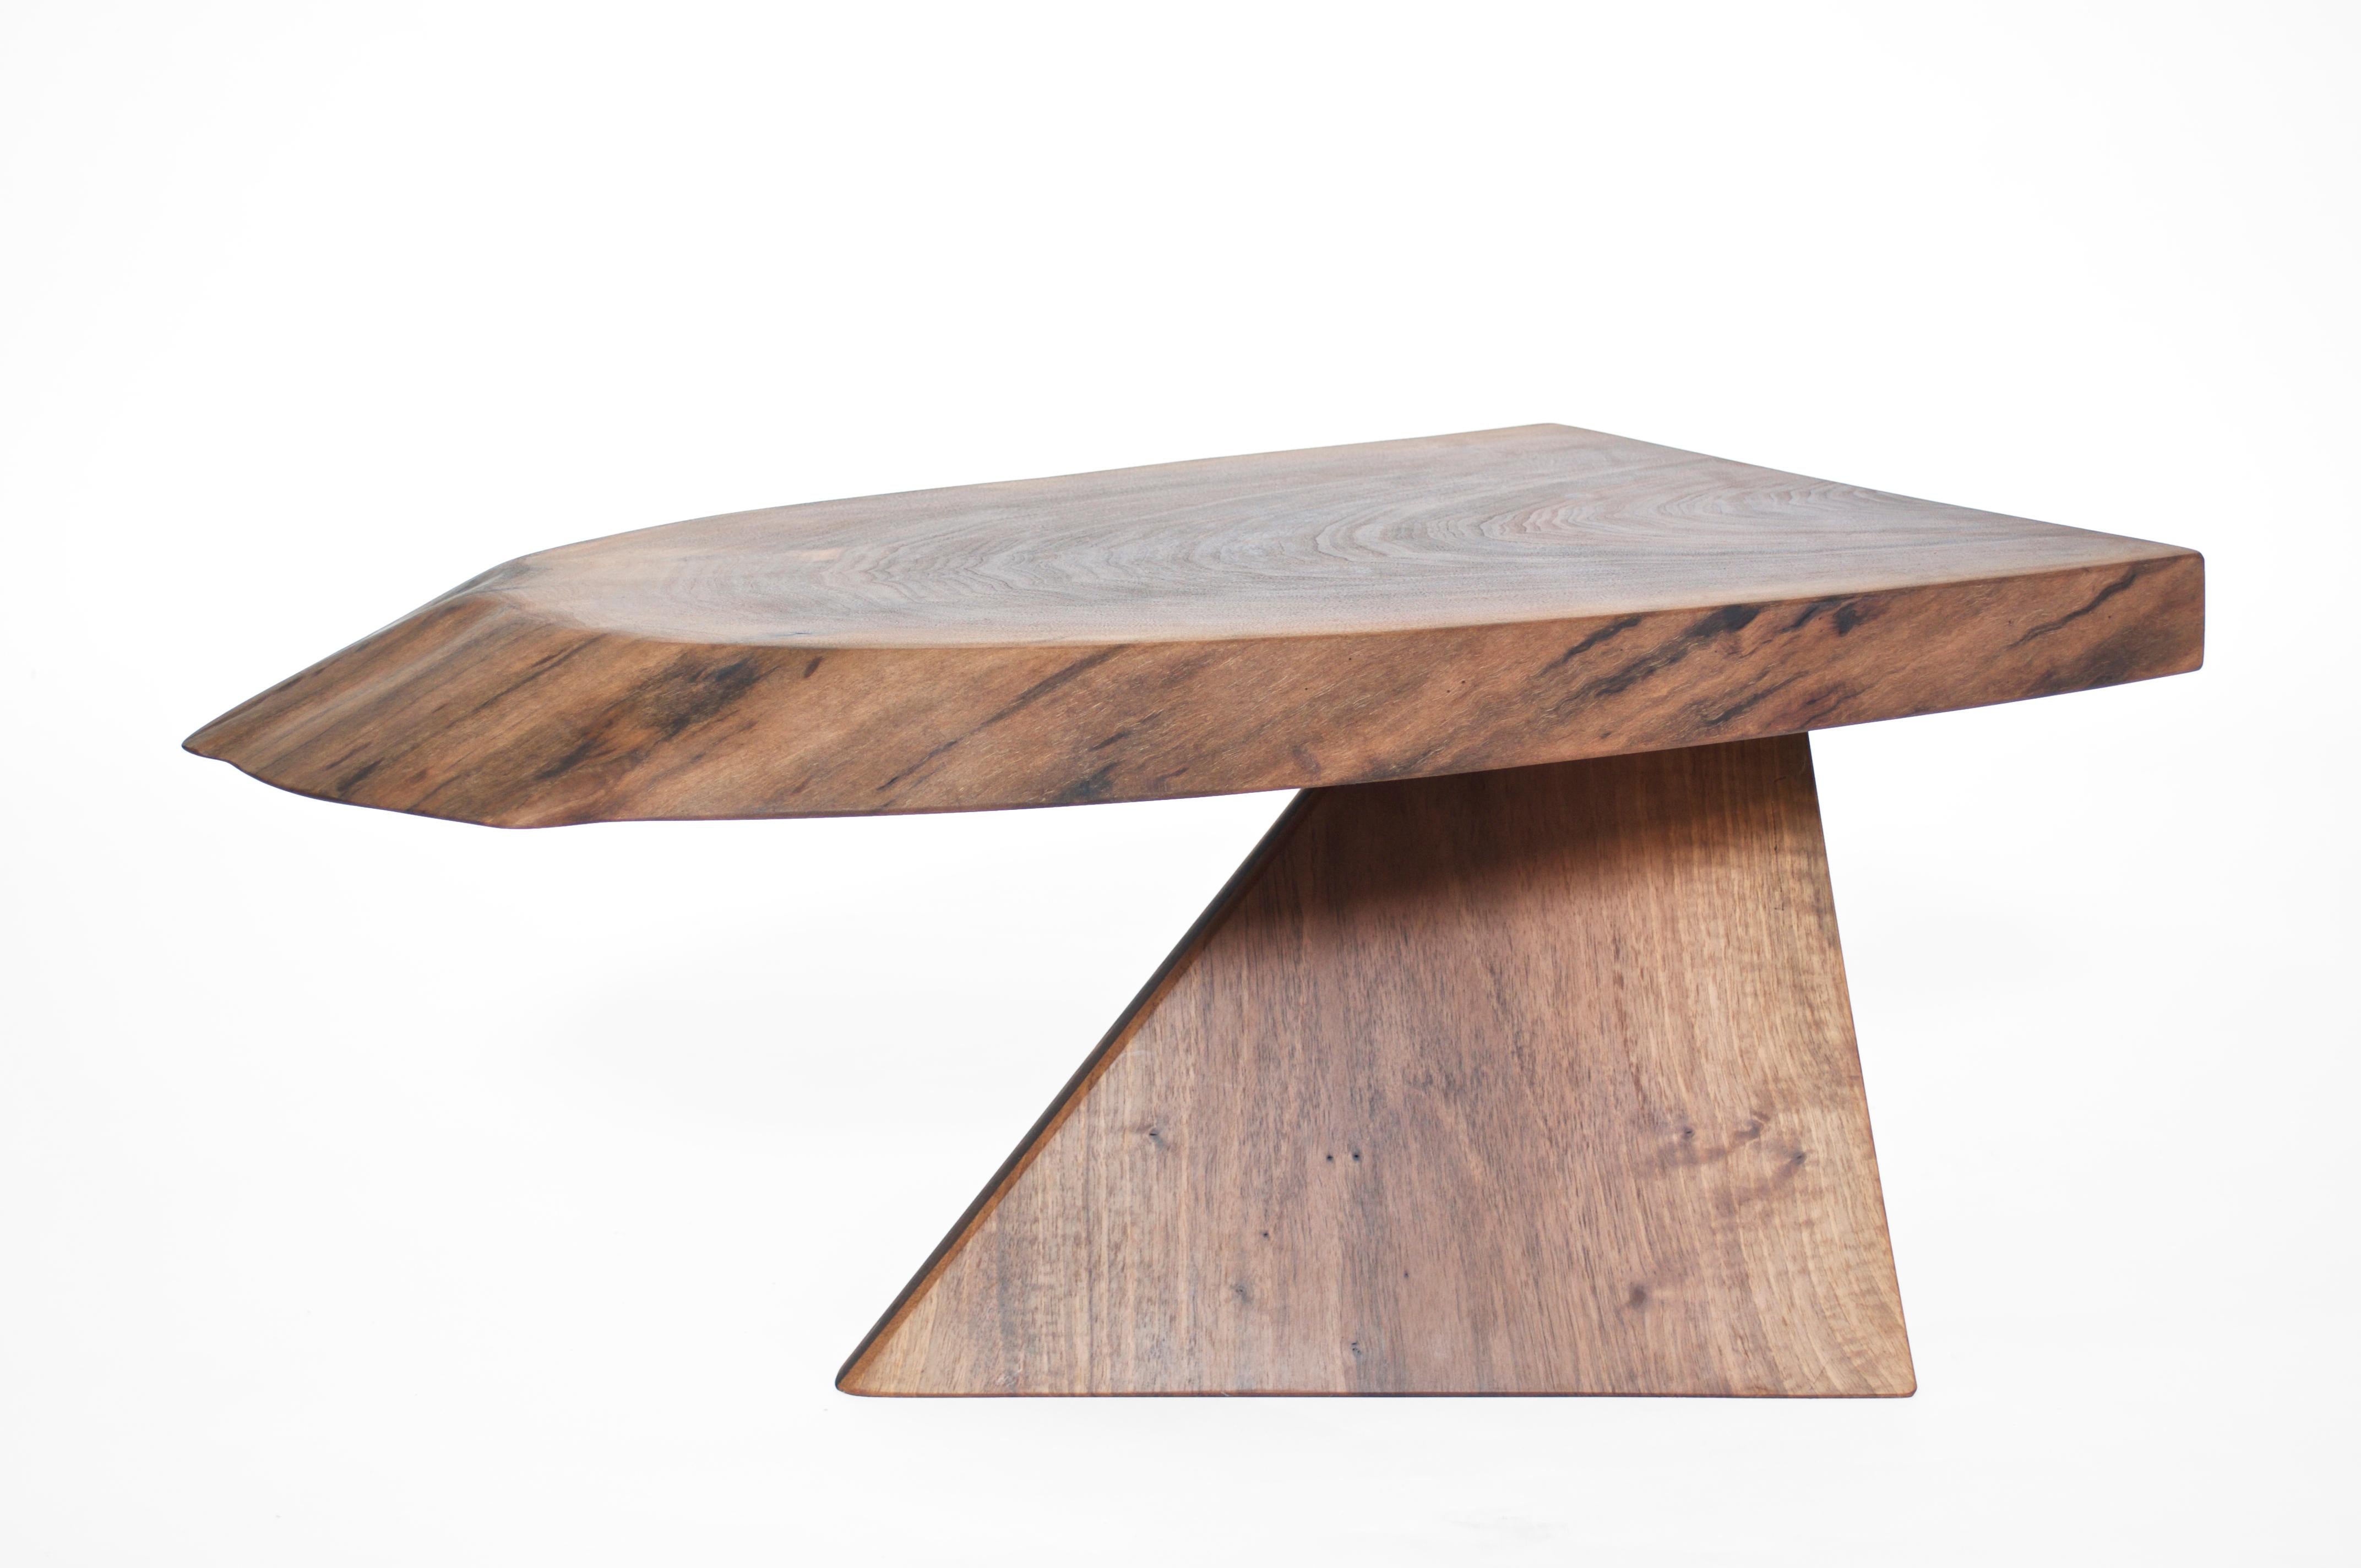 Unique walnut signed table by Jörg Pietschmann T2601
Materials: Walnut, polished oil finish
Measures: H 35 x W 78 x D 47 cm

In Pietschmann’s sculptures, trees that for centuries were part of a landscape and founded in primordial forces tell stories